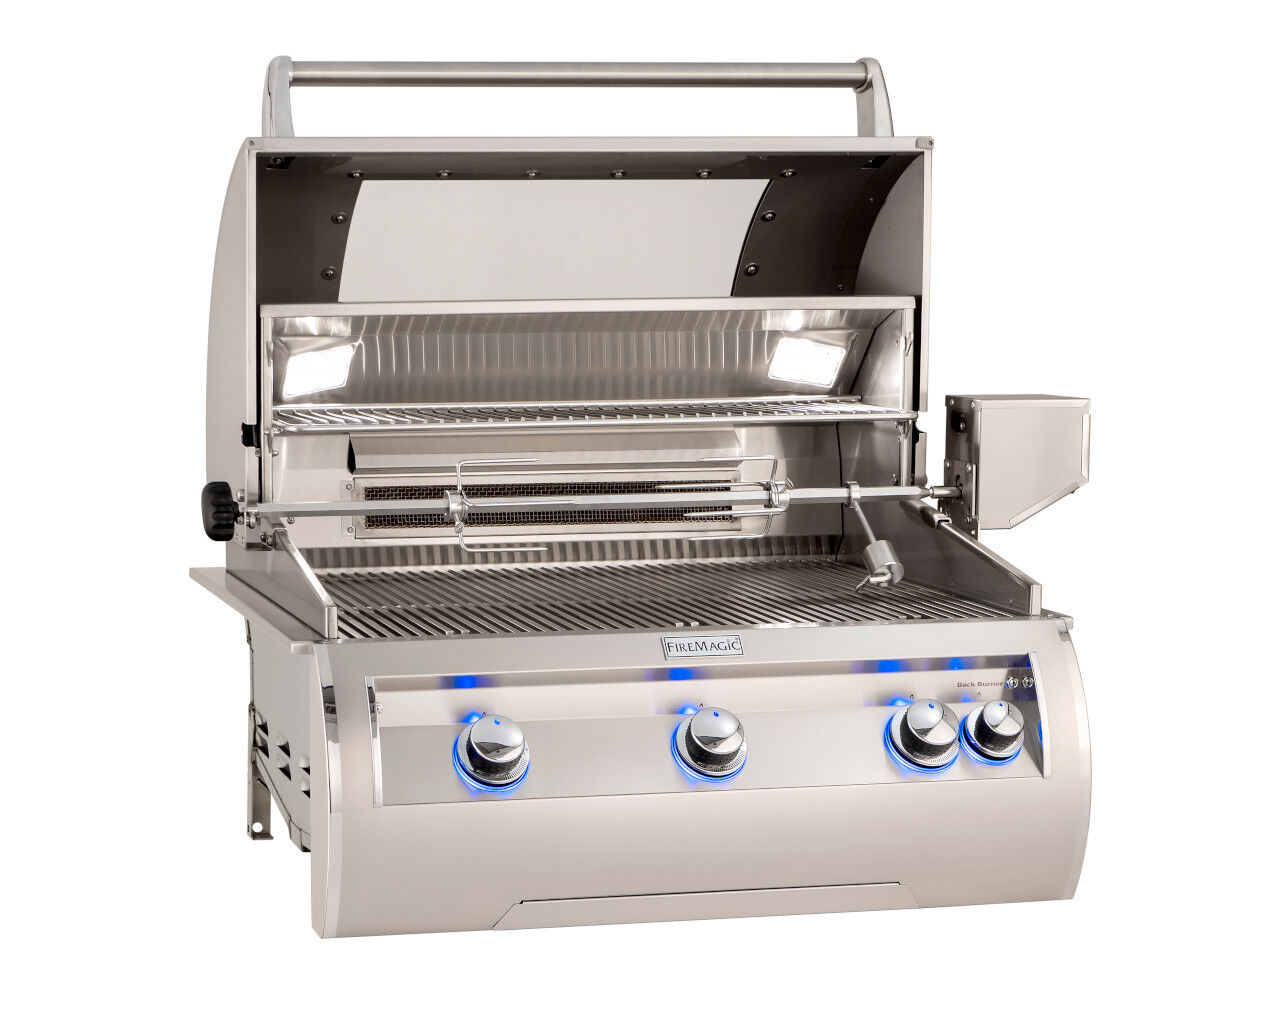 Buy Fire Magic Grills Aurora A790i 3 Burner Built-In BBQ (H Shaped Burners) with Analog 